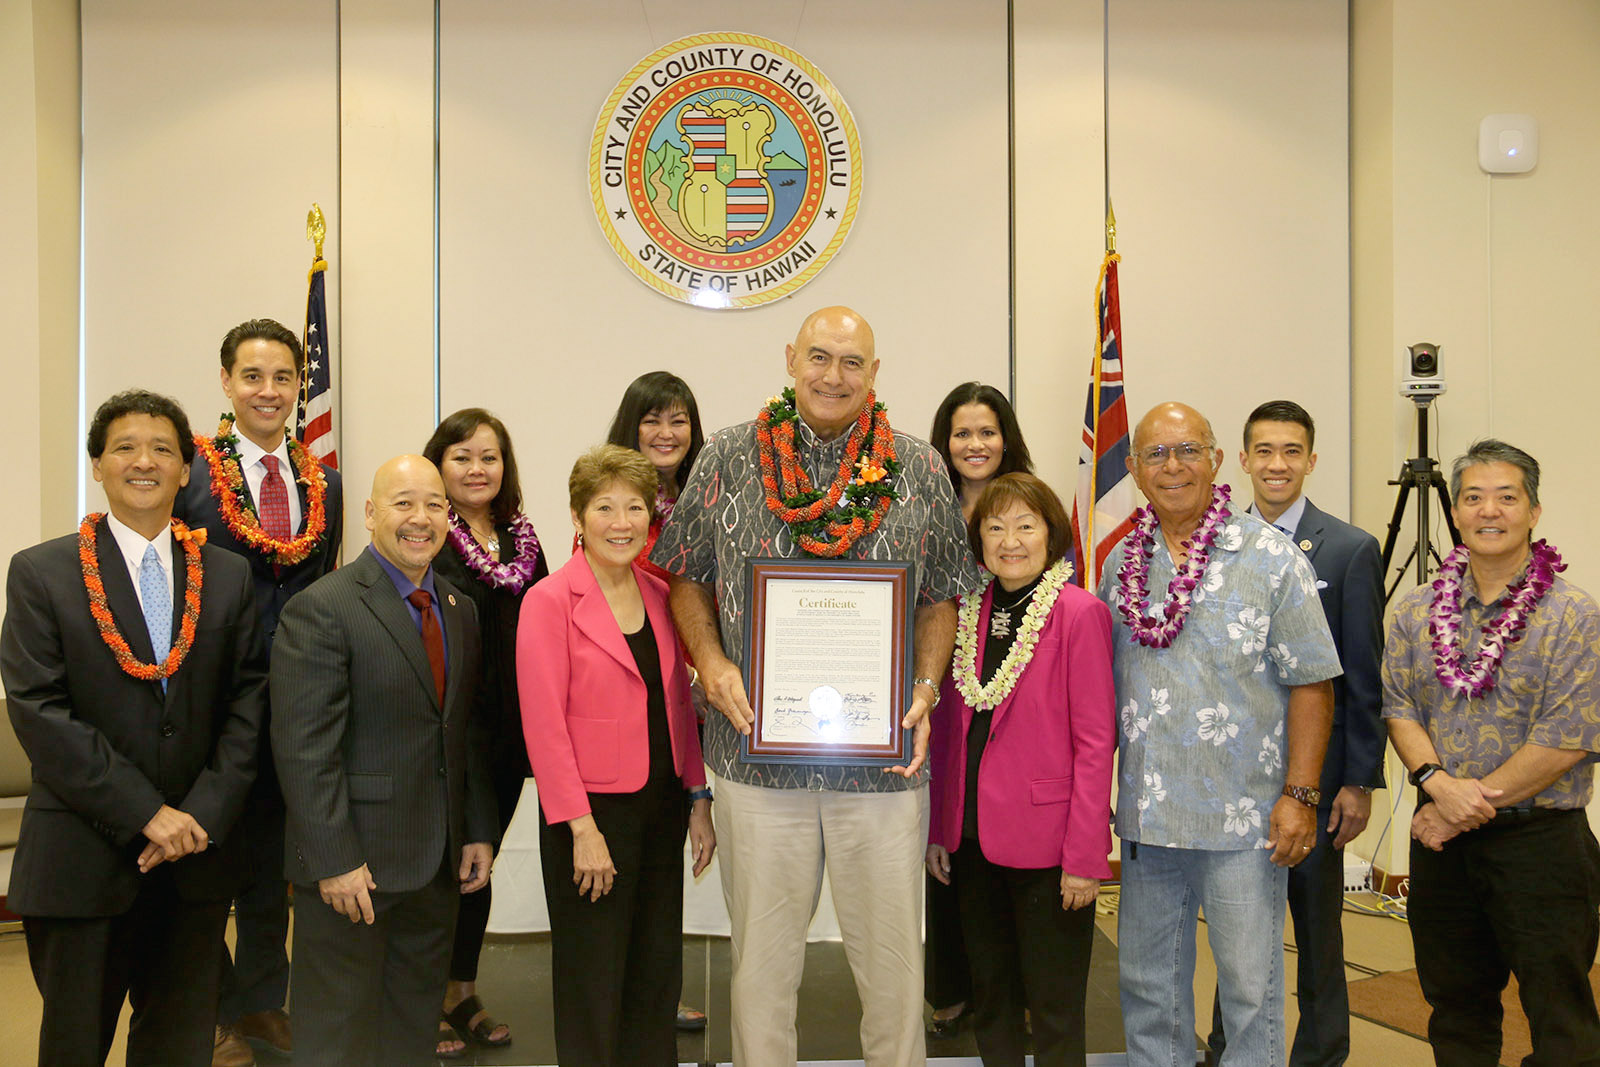 Former UH West Oʻahu Chancellor Rockne Freitas poses with members of the Honolulu City Council, UH West Oʻahu staff Kevin Ishida, Wendy Tatsuno, and Cindy Vinluan, and community member Shad Kane.